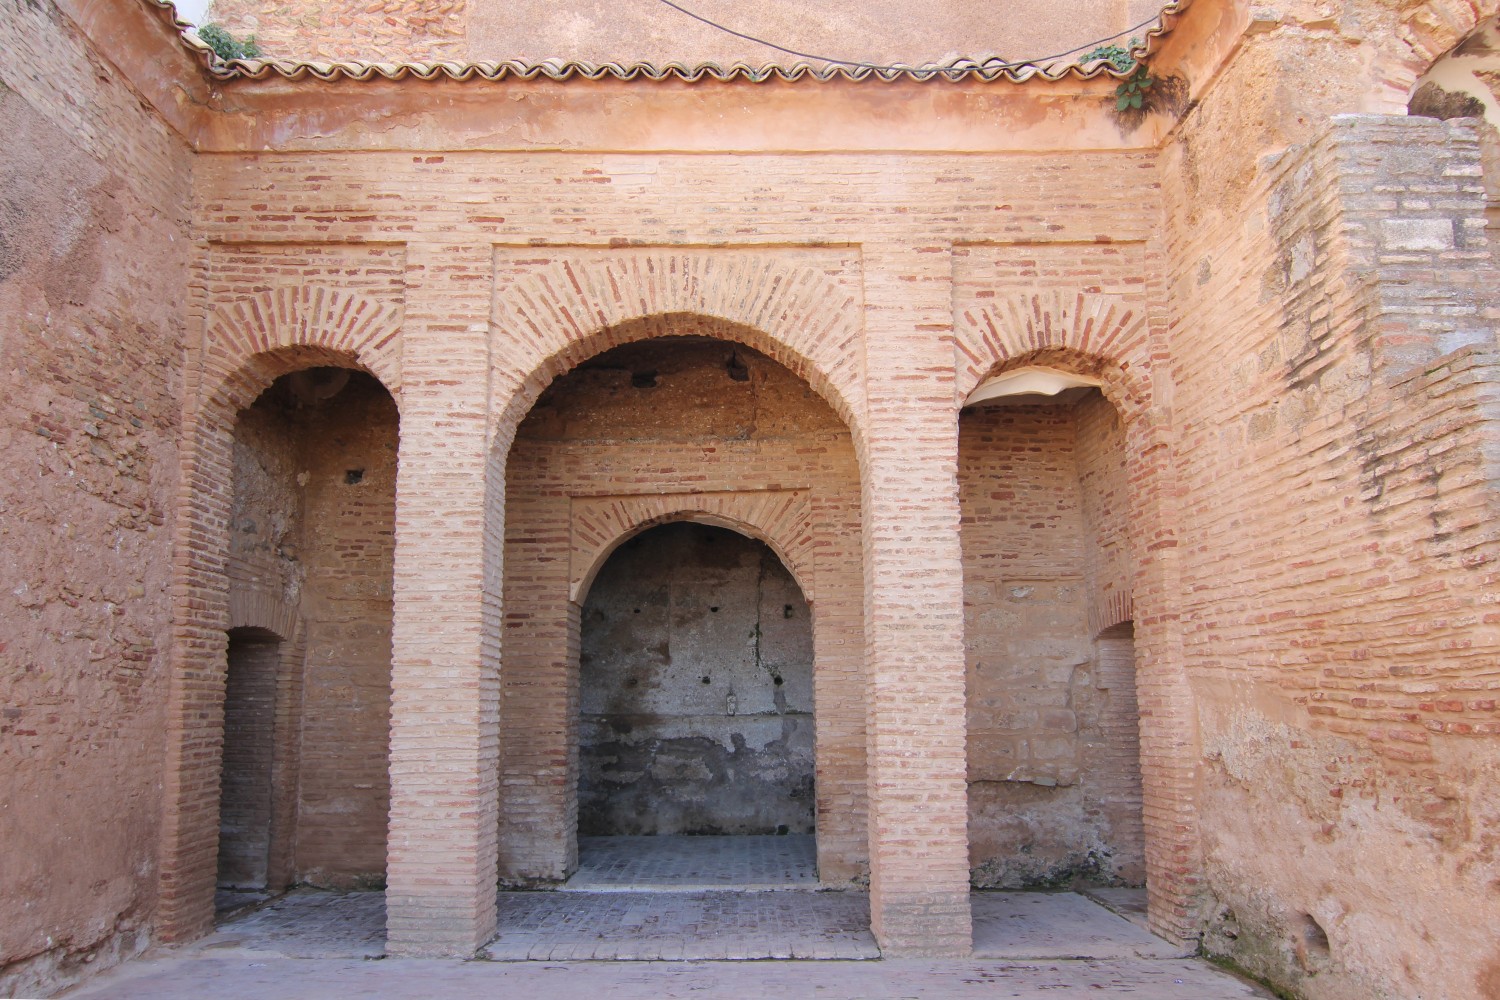 View of gallery of the main courtyard